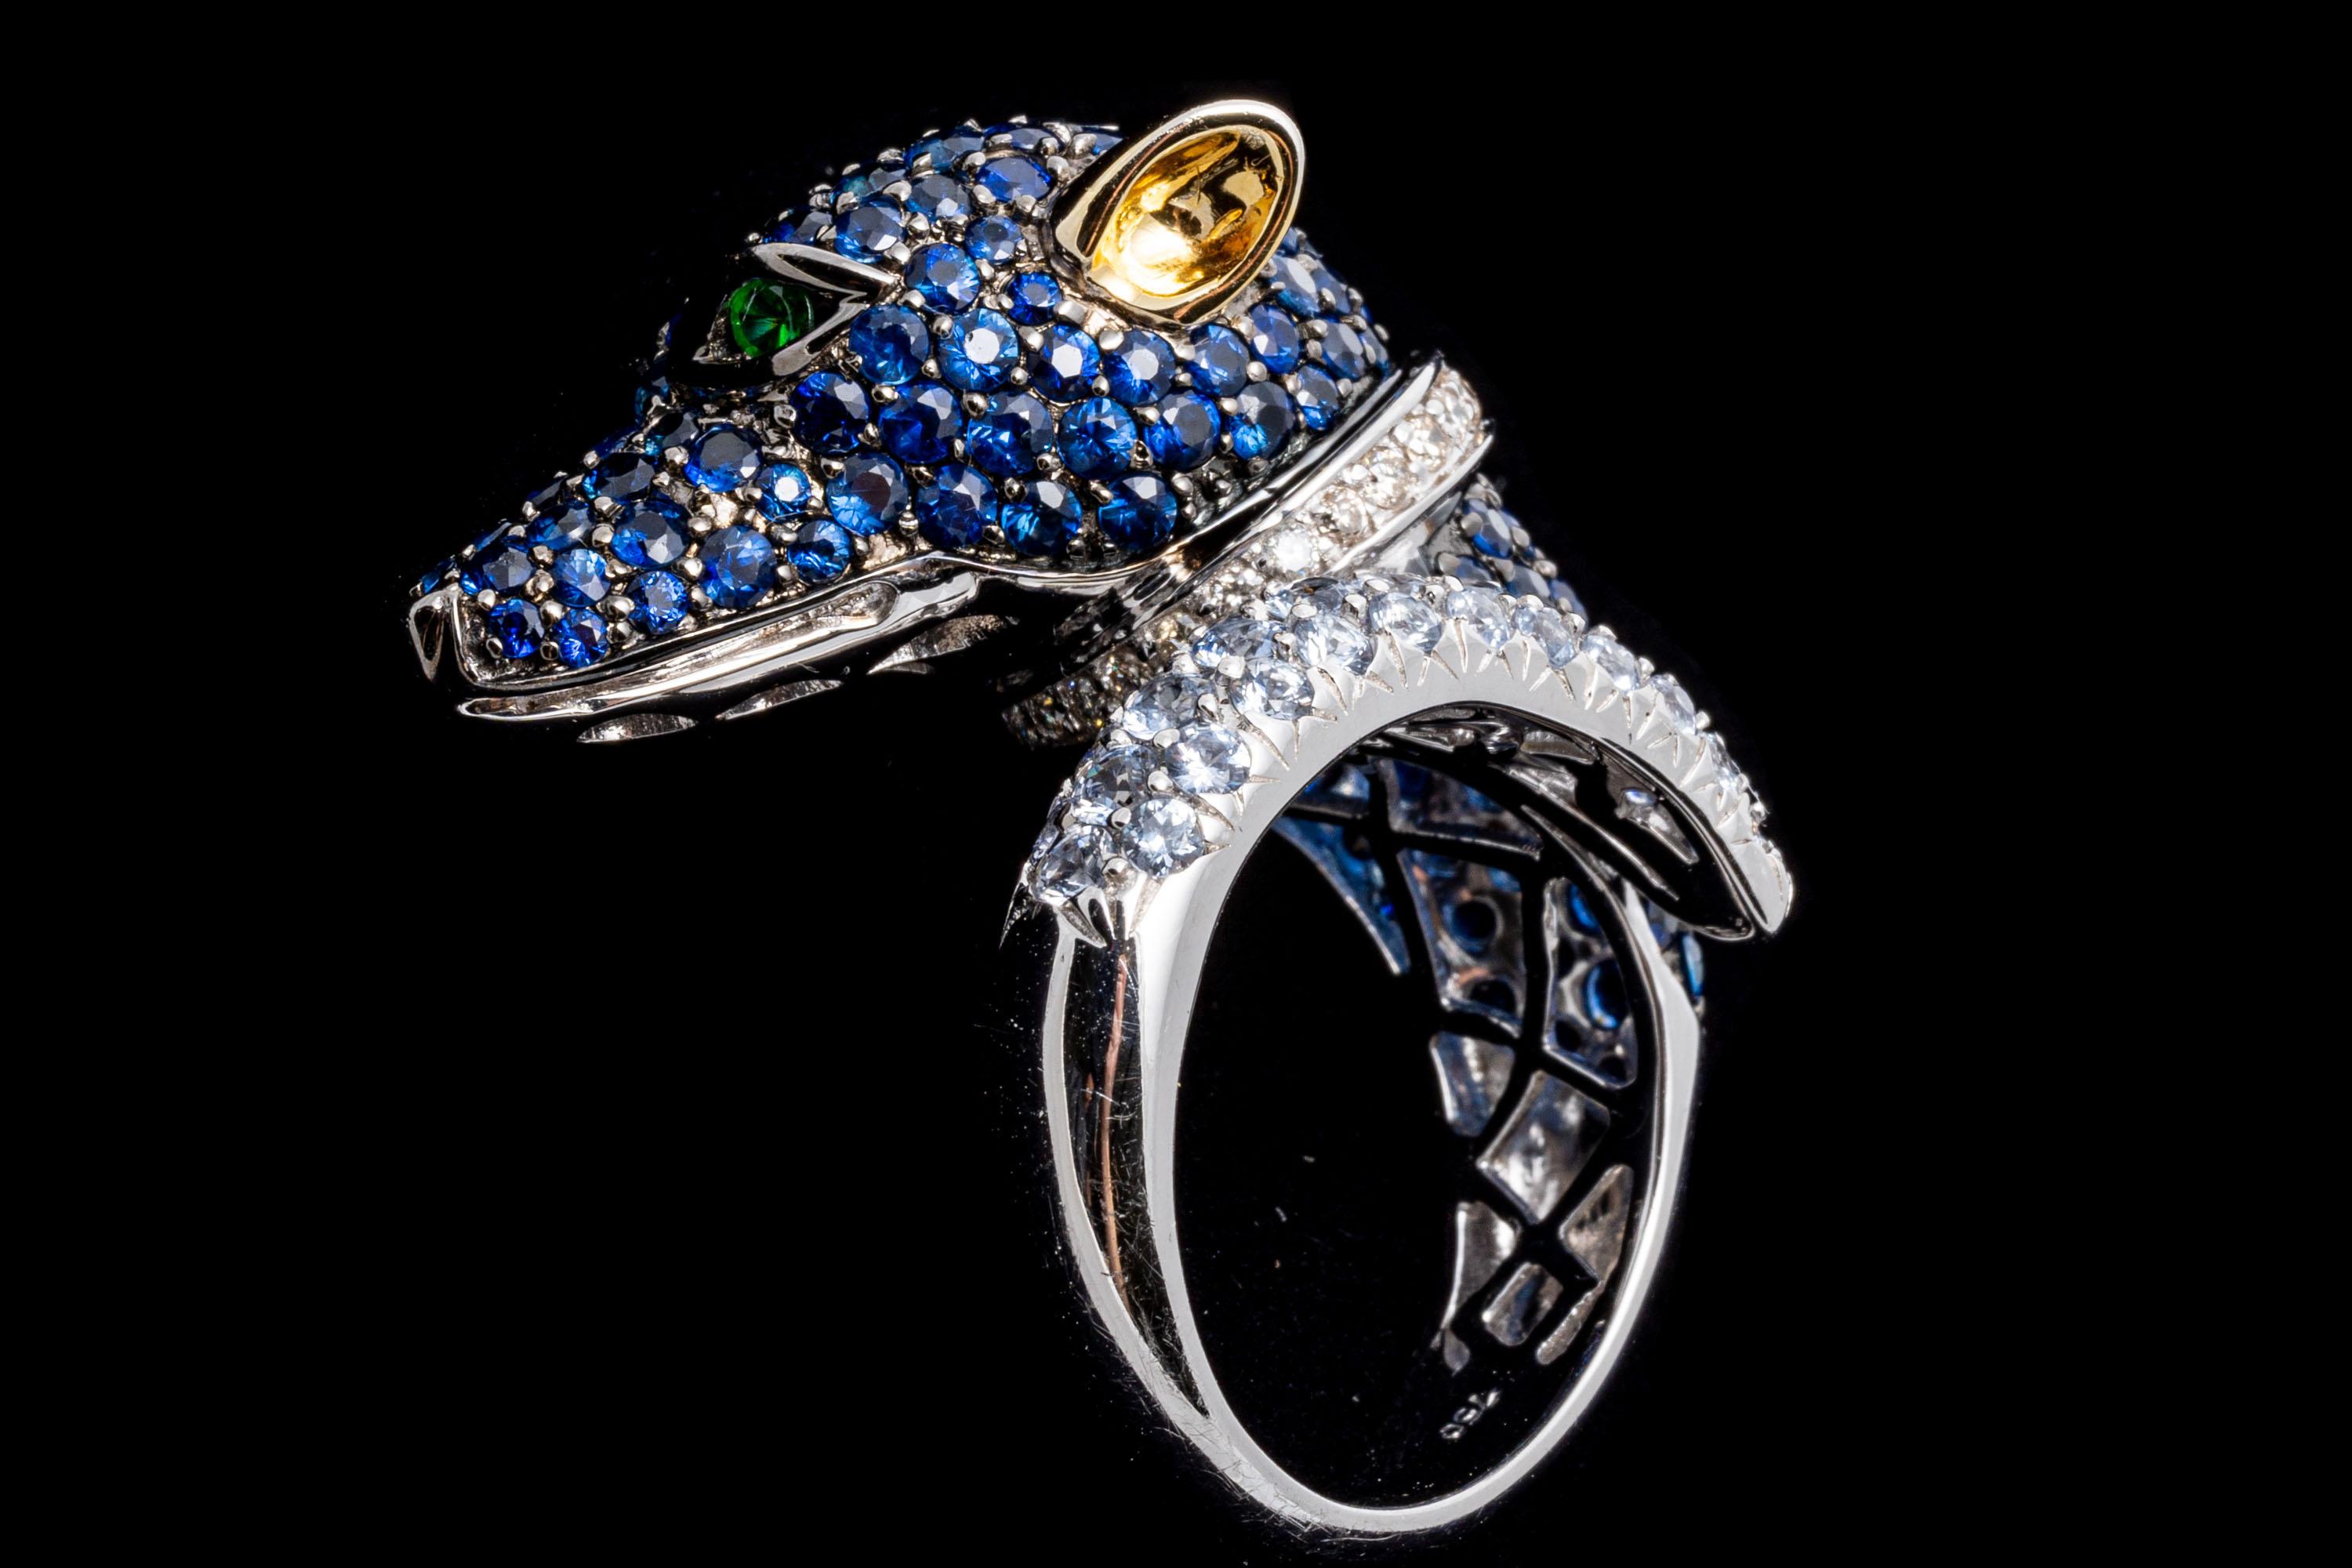 18k White Gold Pave Set Sapphire, Diamond And Tsavorite Dog Ring, Size 7.25 For Sale 3